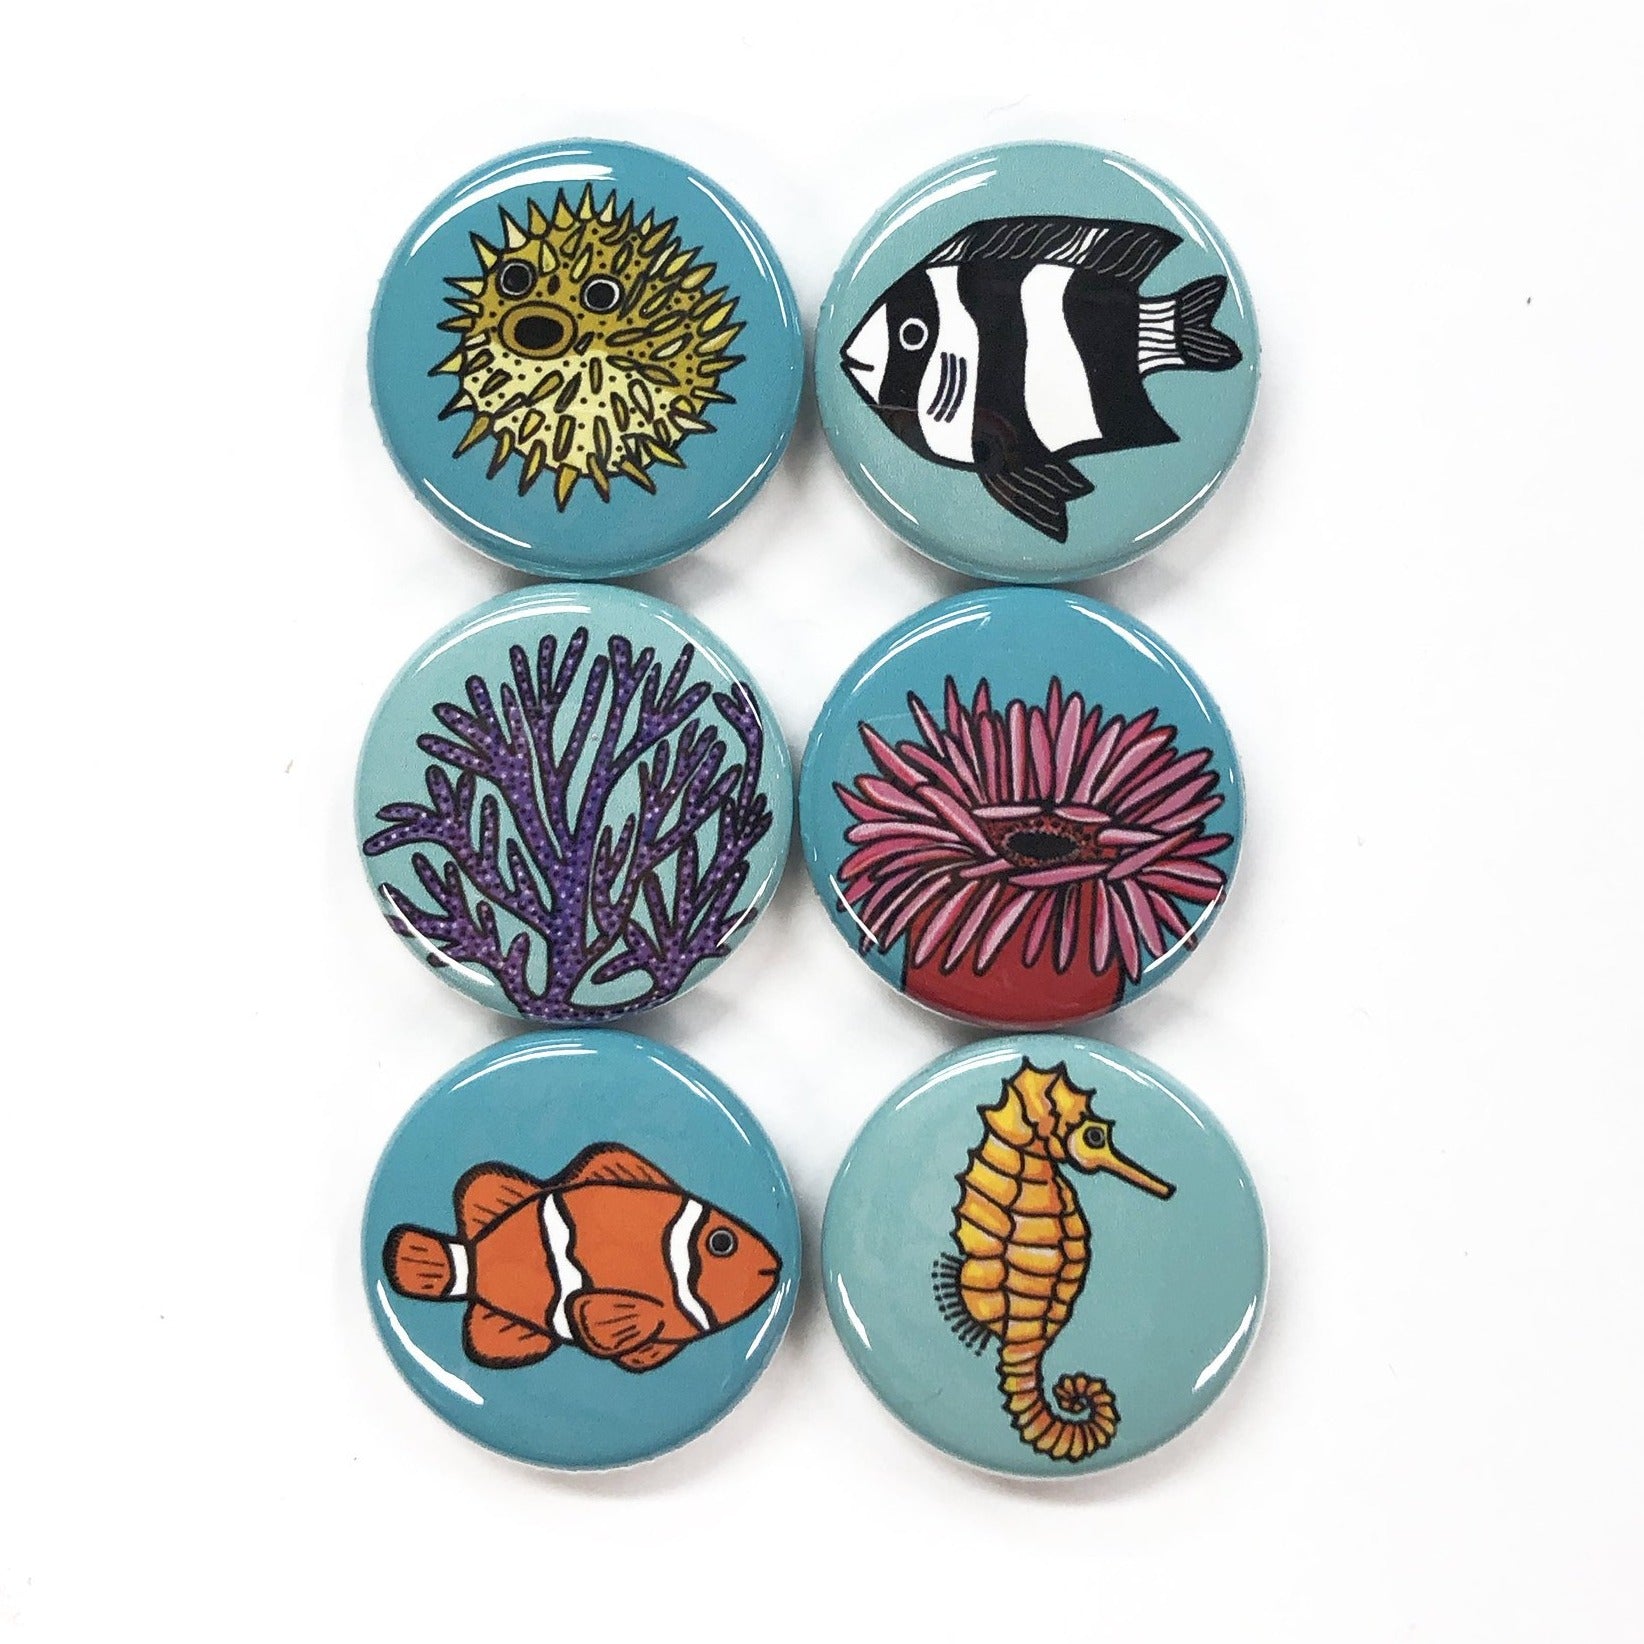 Coral Reef Fish Magnet or Pinback Button Set - Claudine Intner